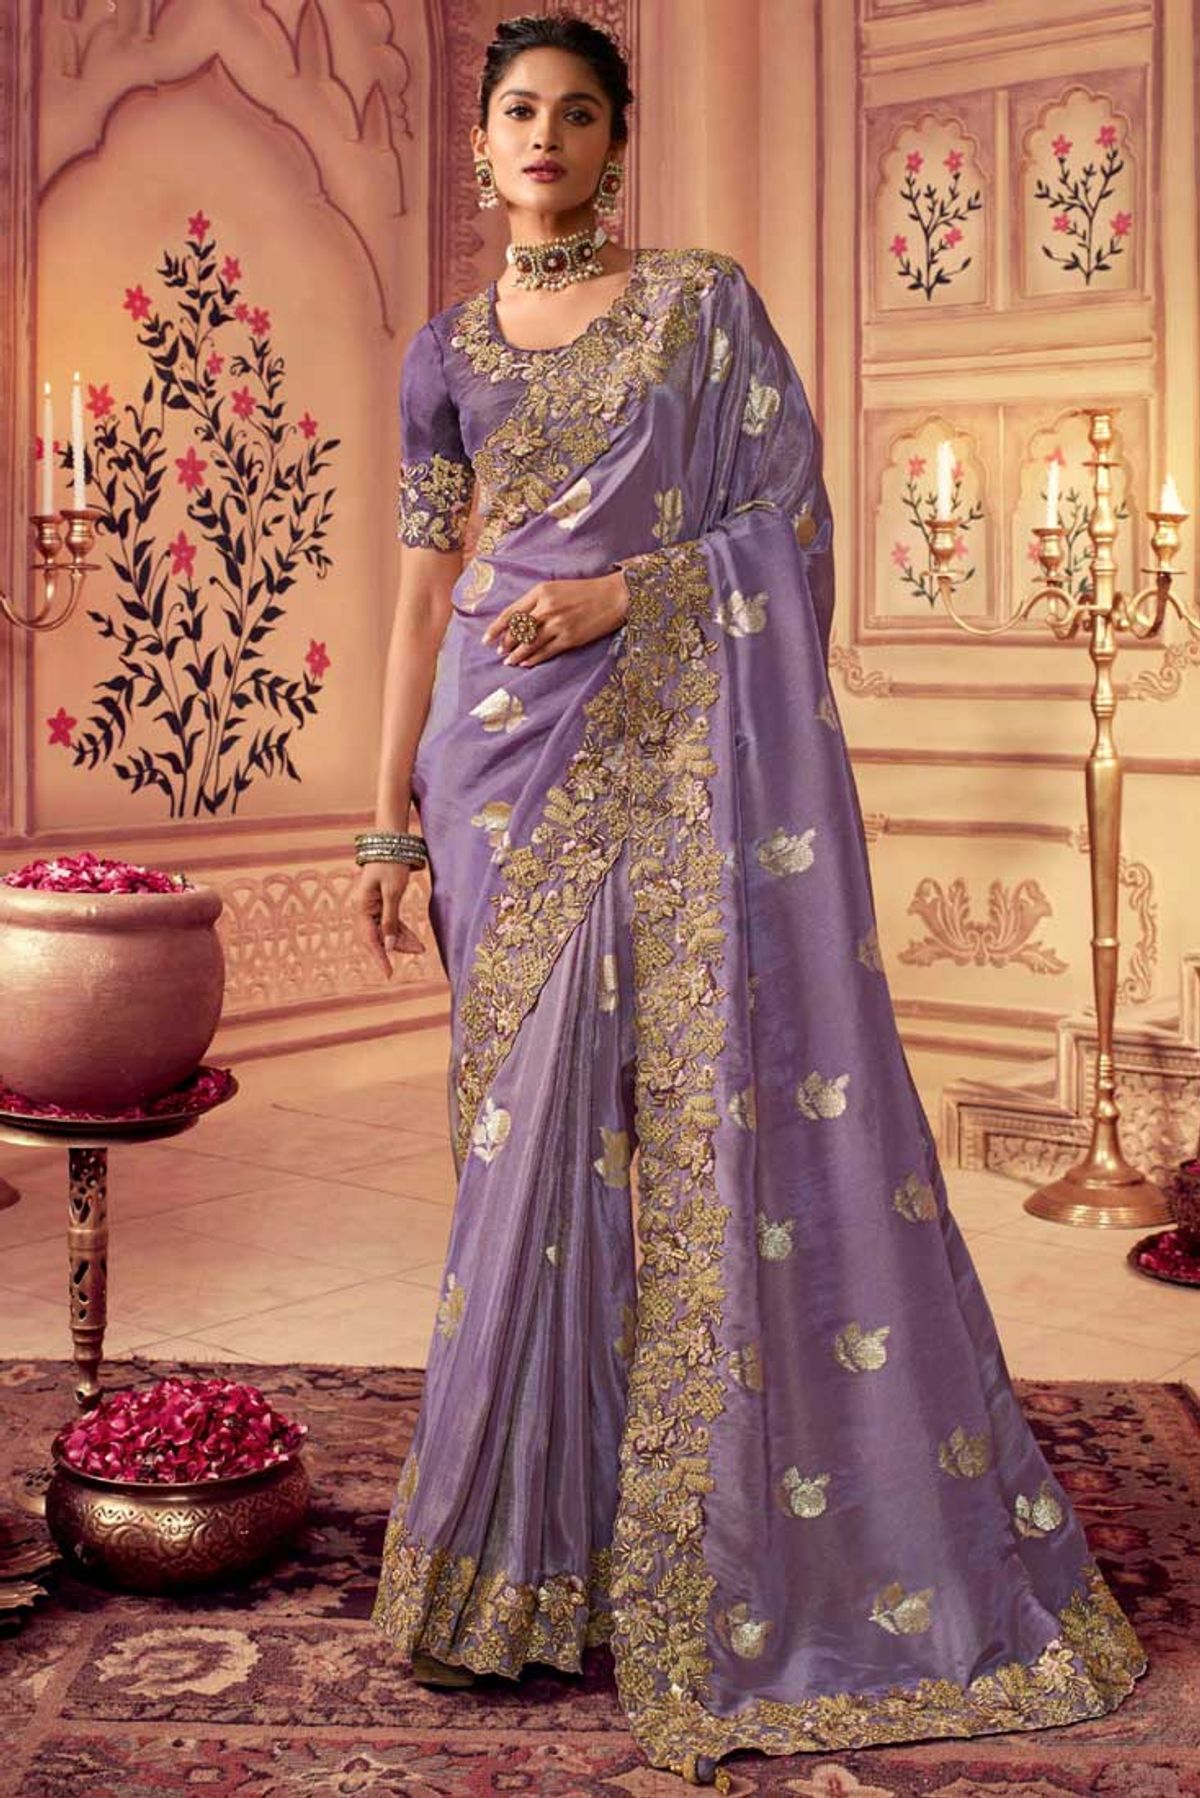 Rutba Vol 2 By Royal Designer Party Wear Silk Saree Collection at Rs  2595.00 | Fancy Sarees | ID: 26612871588